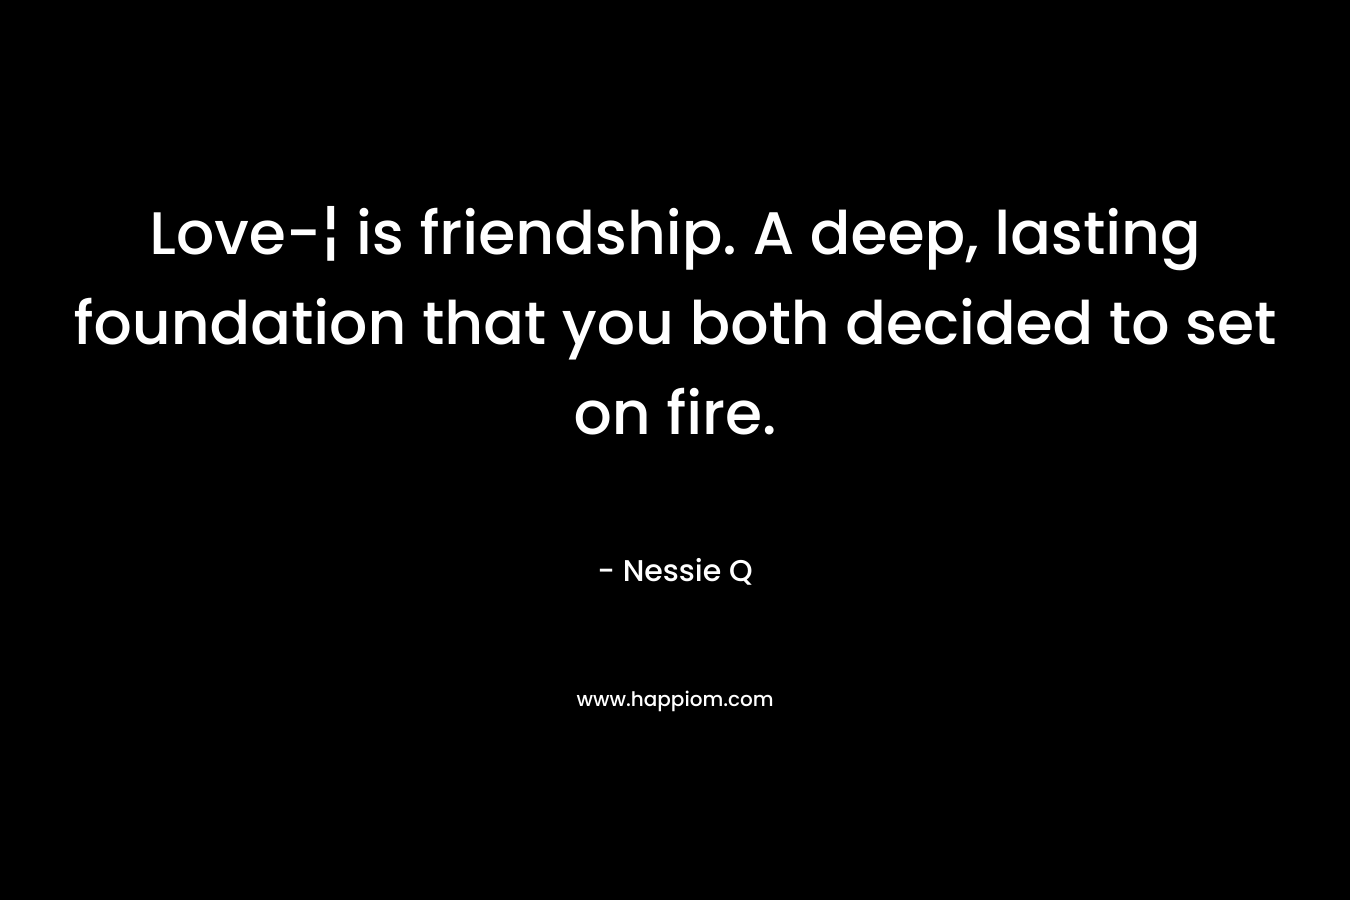 Love-¦ is friendship. A deep, lasting foundation that you both decided to set on fire.